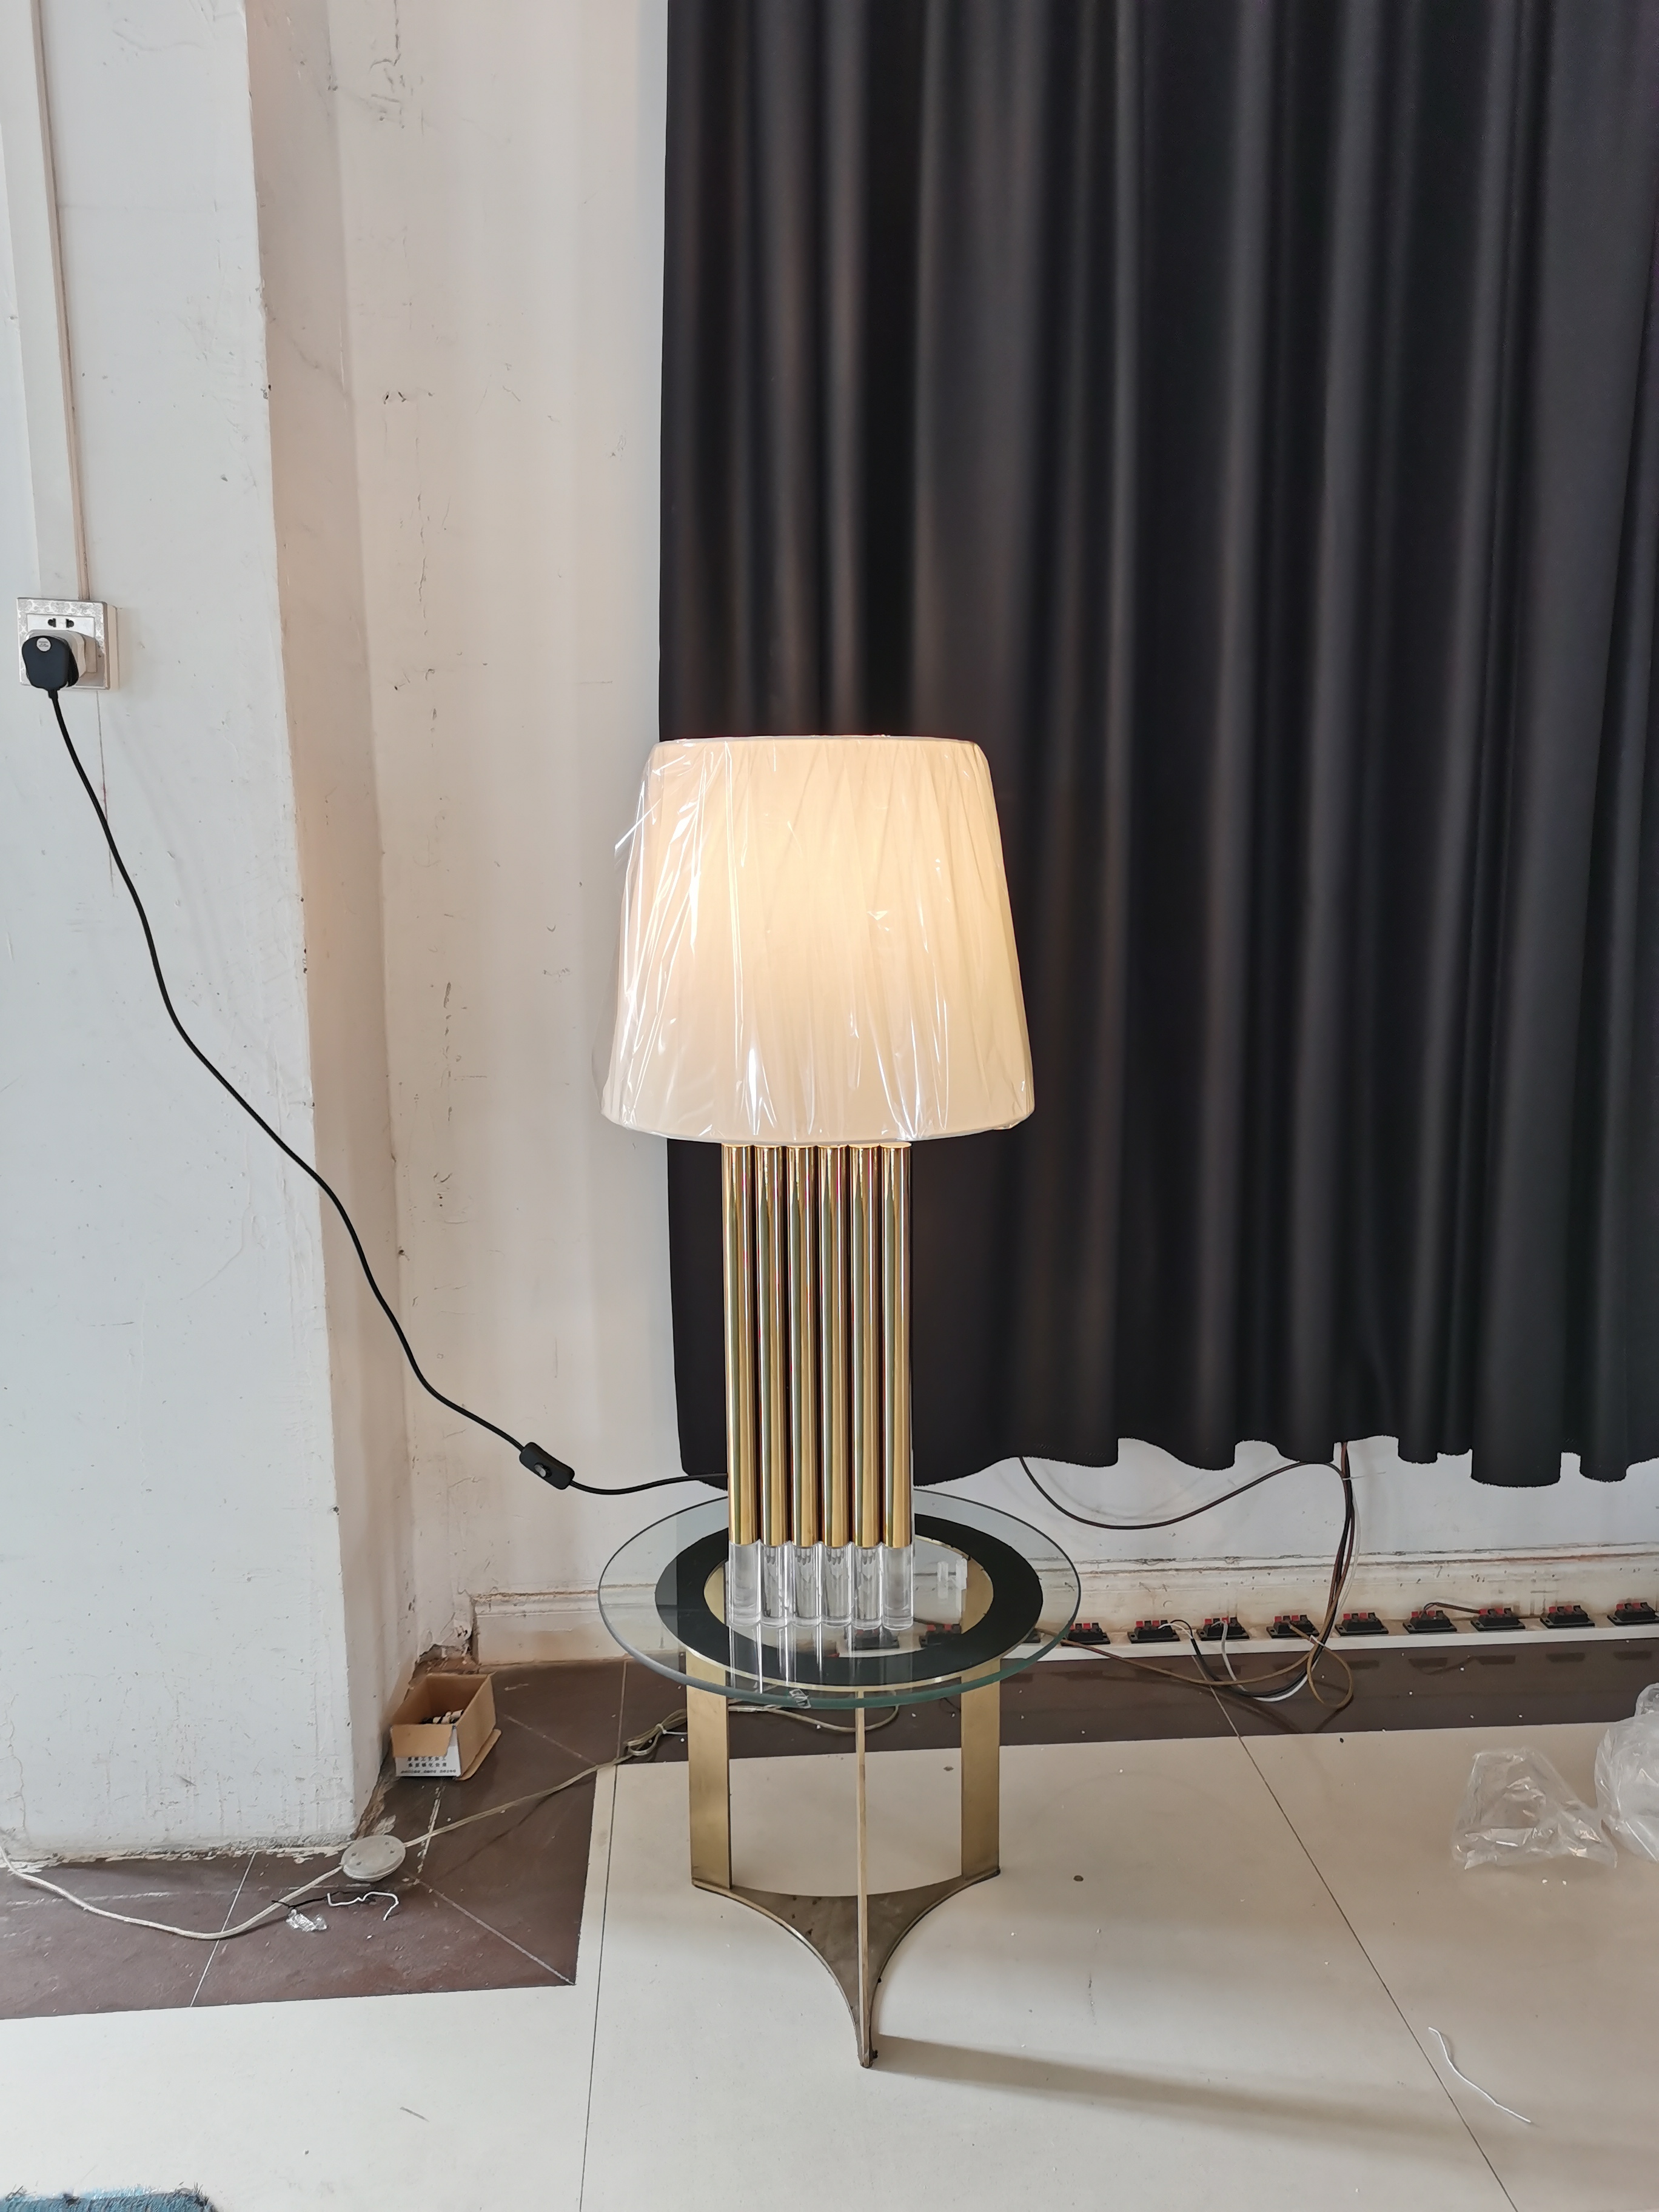 Modern Stainless Steel Home Table Lamp(KAT18-167)